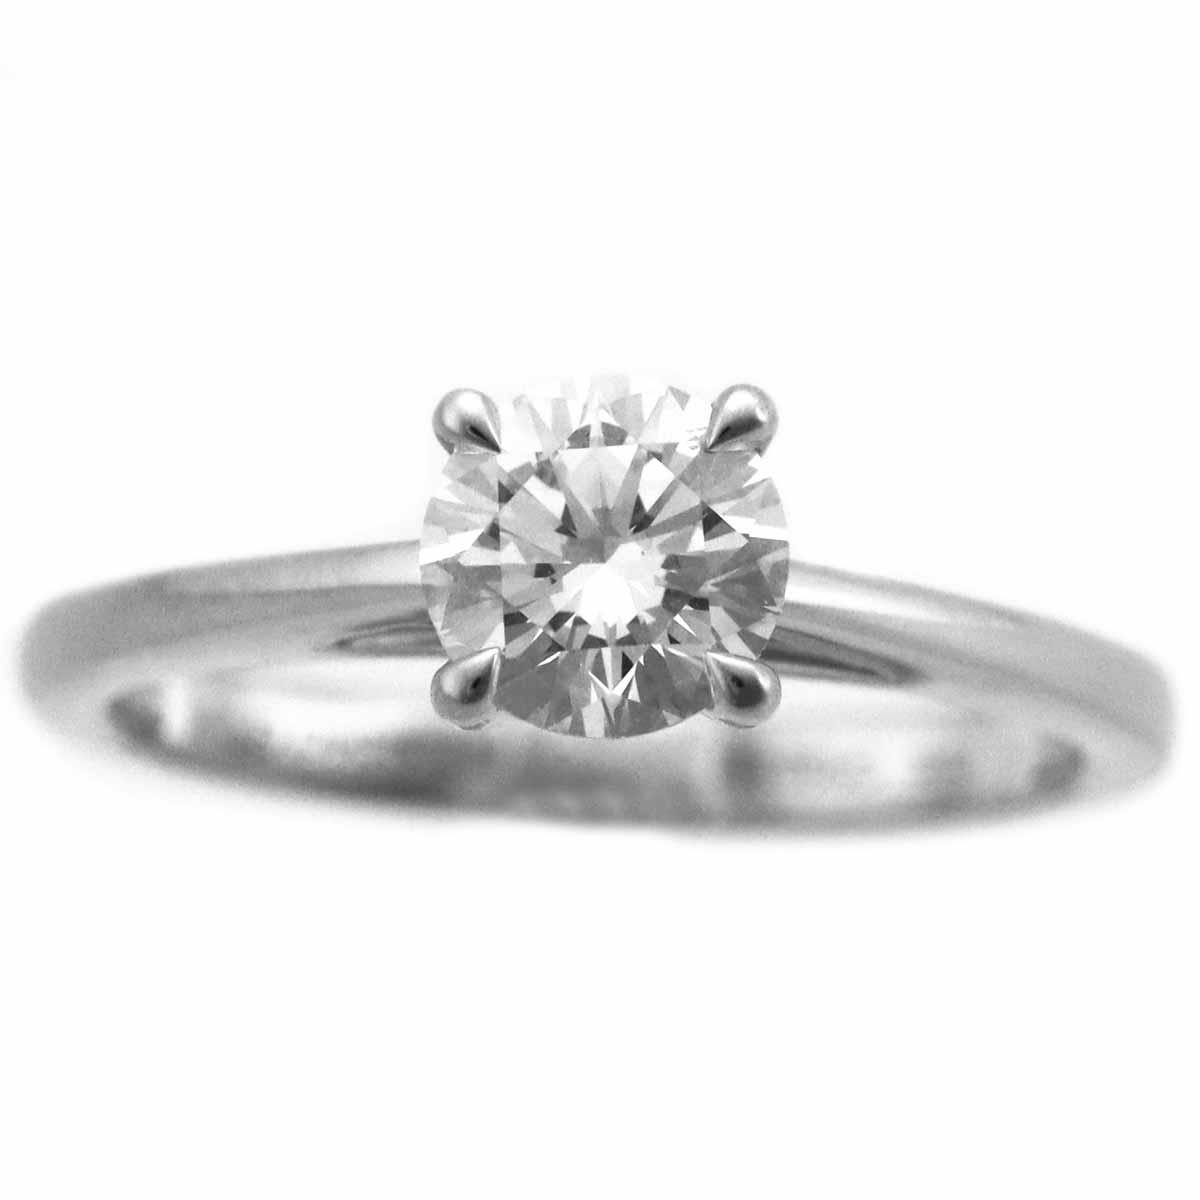 Brand:GRAFF
Name:Diamond solitaire ring
Material:1P diamond (0.54ct G-VS1-3Ex), PT950 platinum
Weight:3.0g（Approx)
Ring size:EU：44.5  / US：3.25 / Japanese : 4.5（Approx)
Width(inch):1.59mm / 0.06in（Approx)
Main stone size:5.30-5.32×3.19mm
Comes